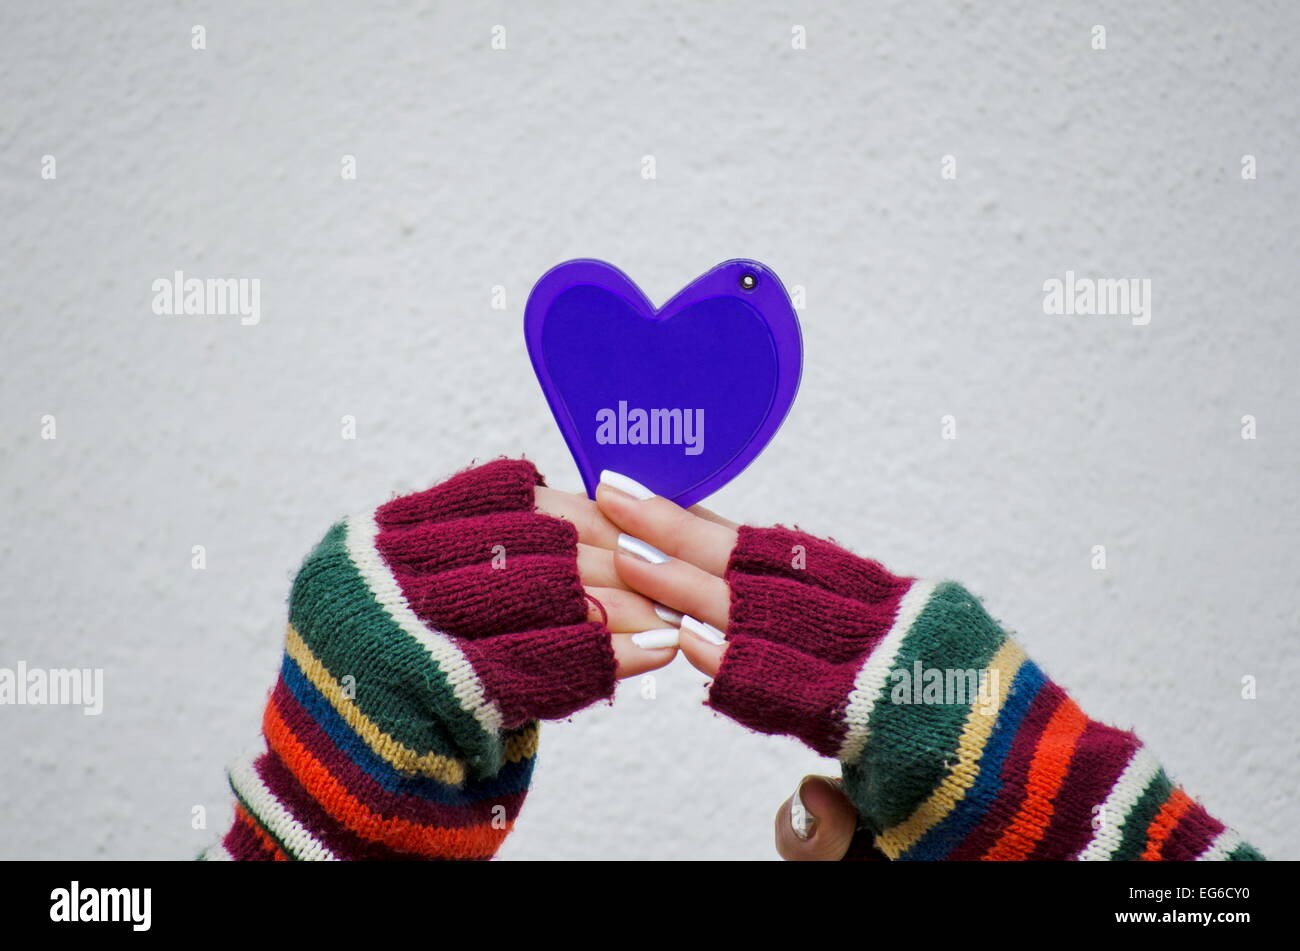 Girl in colorful mittens holding a purple heart against a white wall Stock Photo